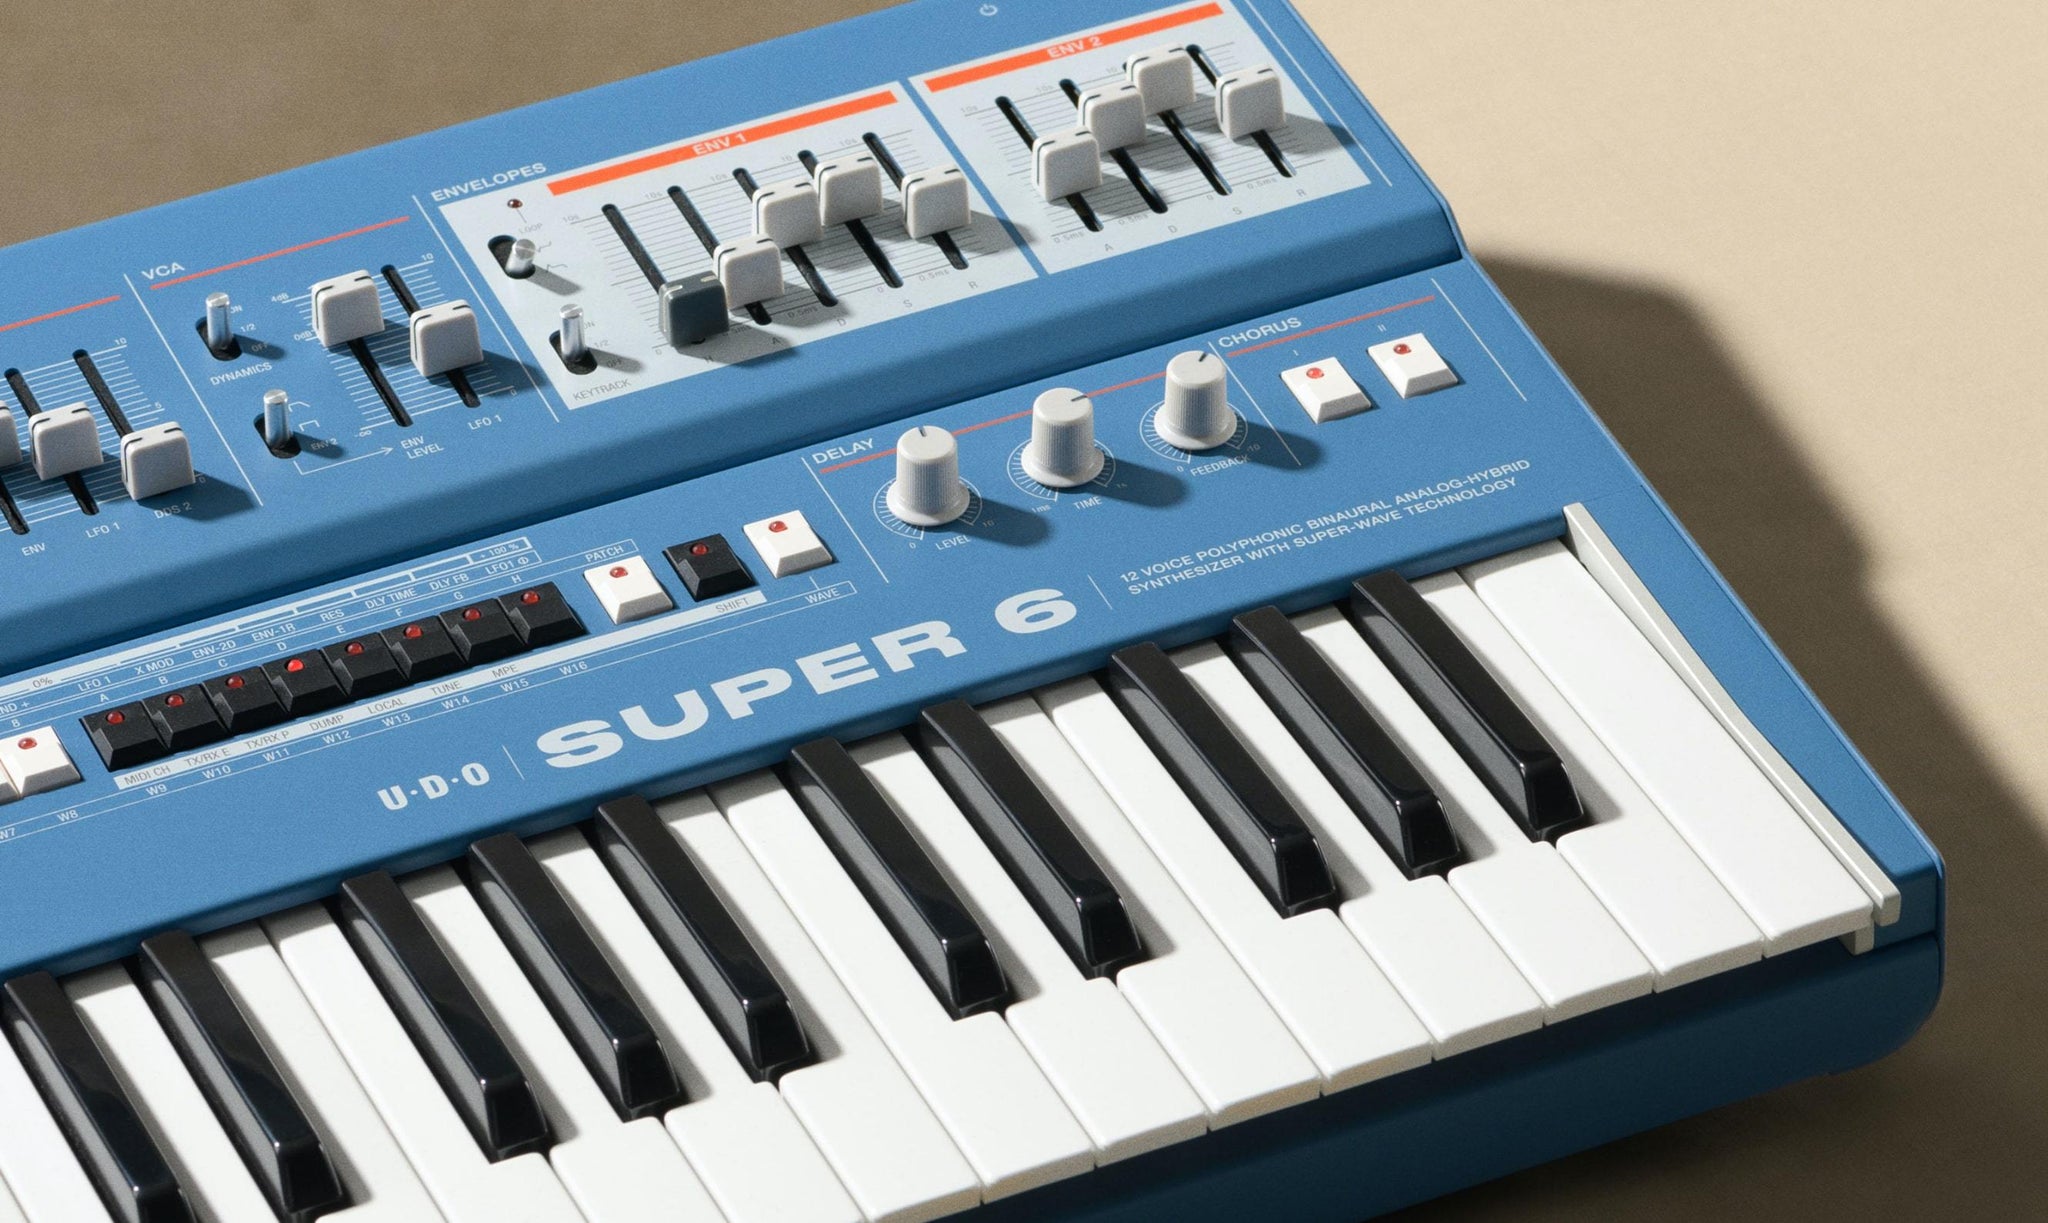 The Super 6 is a 12-voice polyphonic, binaural analog-hybrid synthesizer